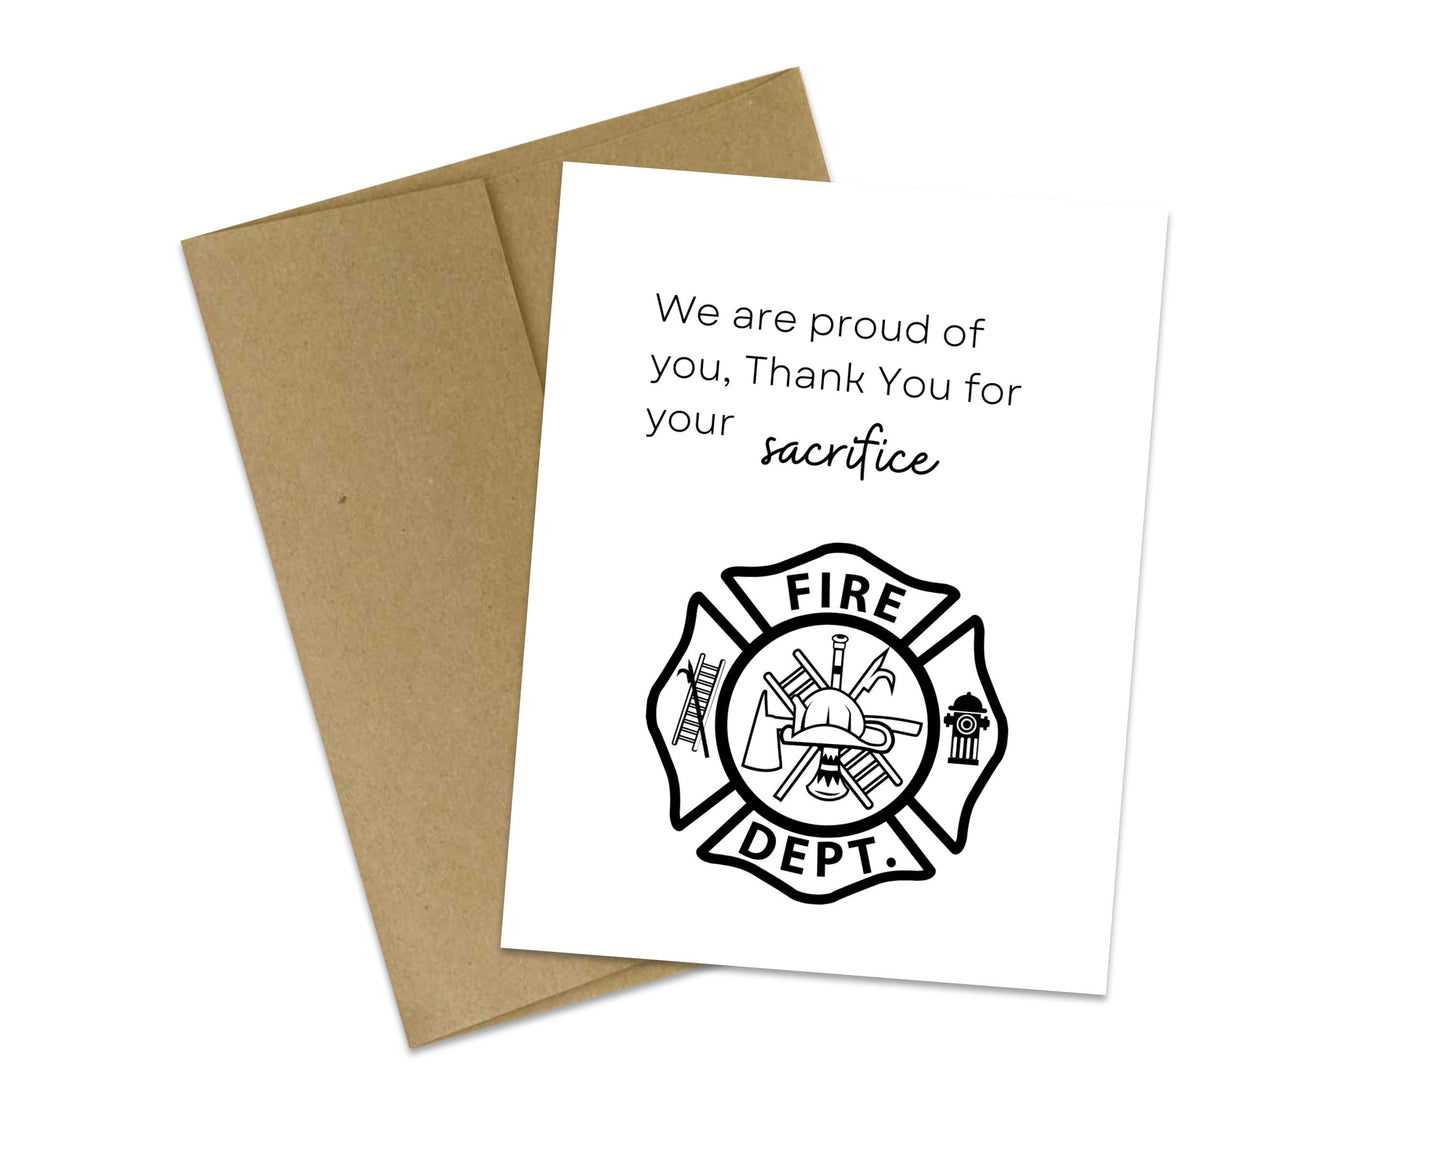 We are proud of you, Thank You for your sacrifice - Firefighter Support Card